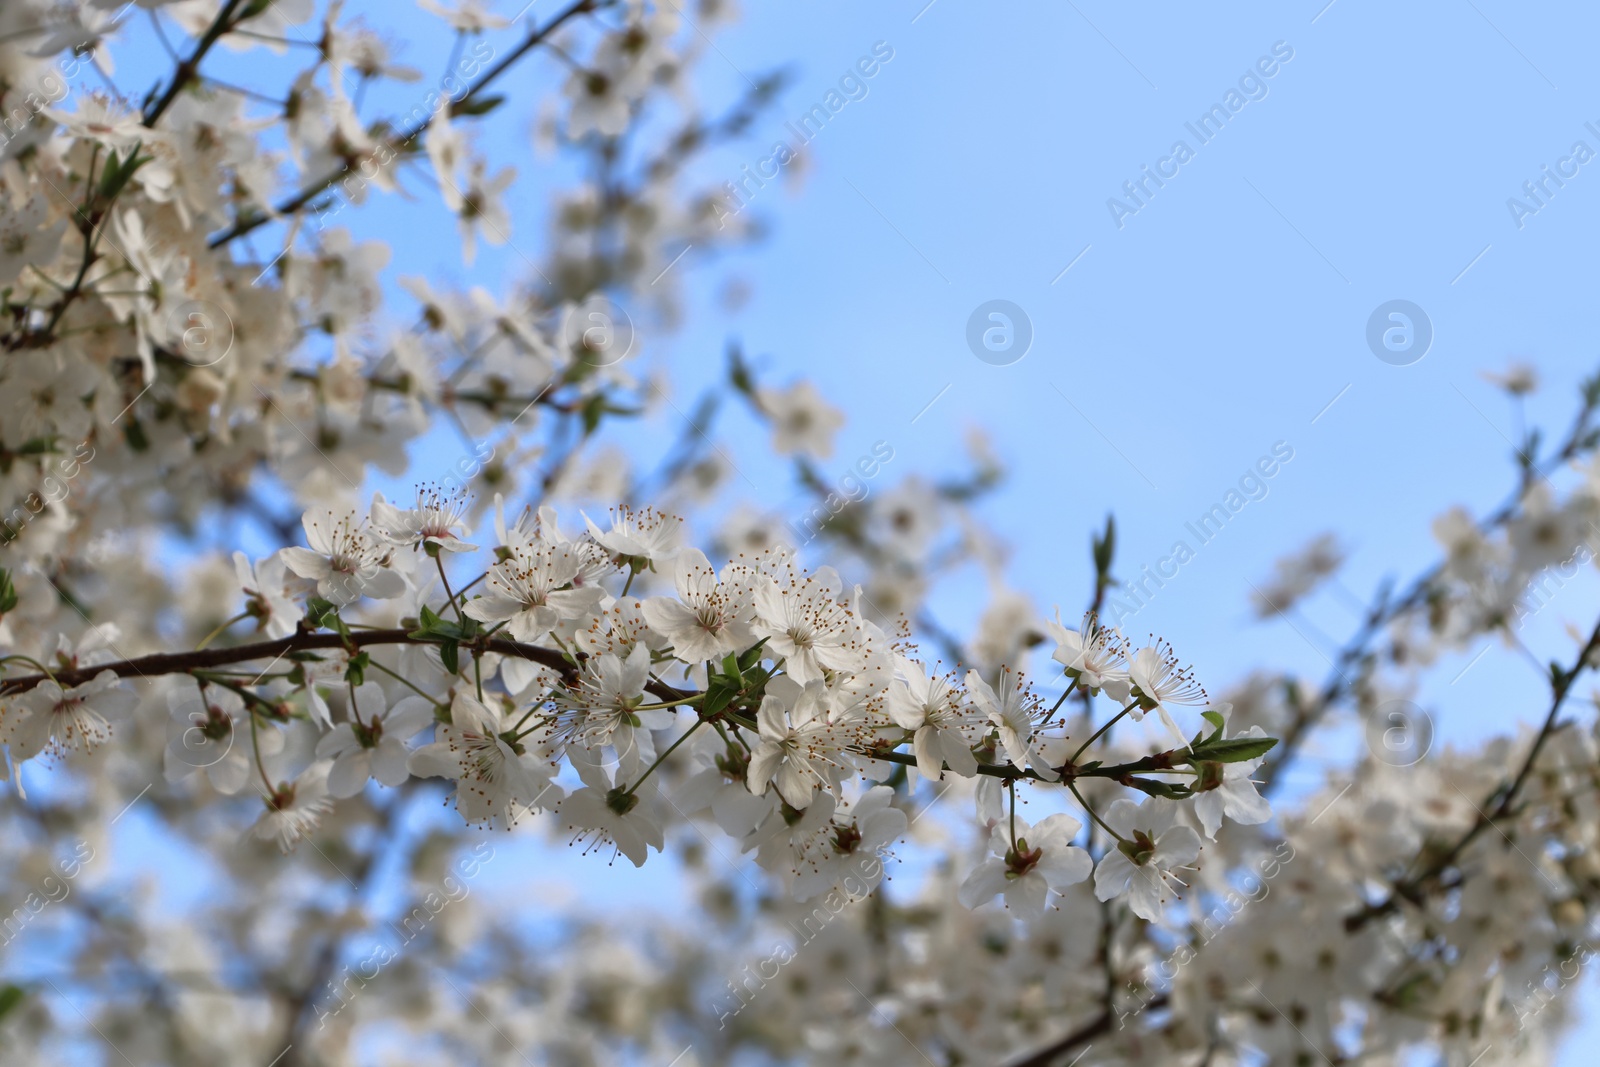 Photo of Cherry tree with white blossoms against blue sky. Spring season